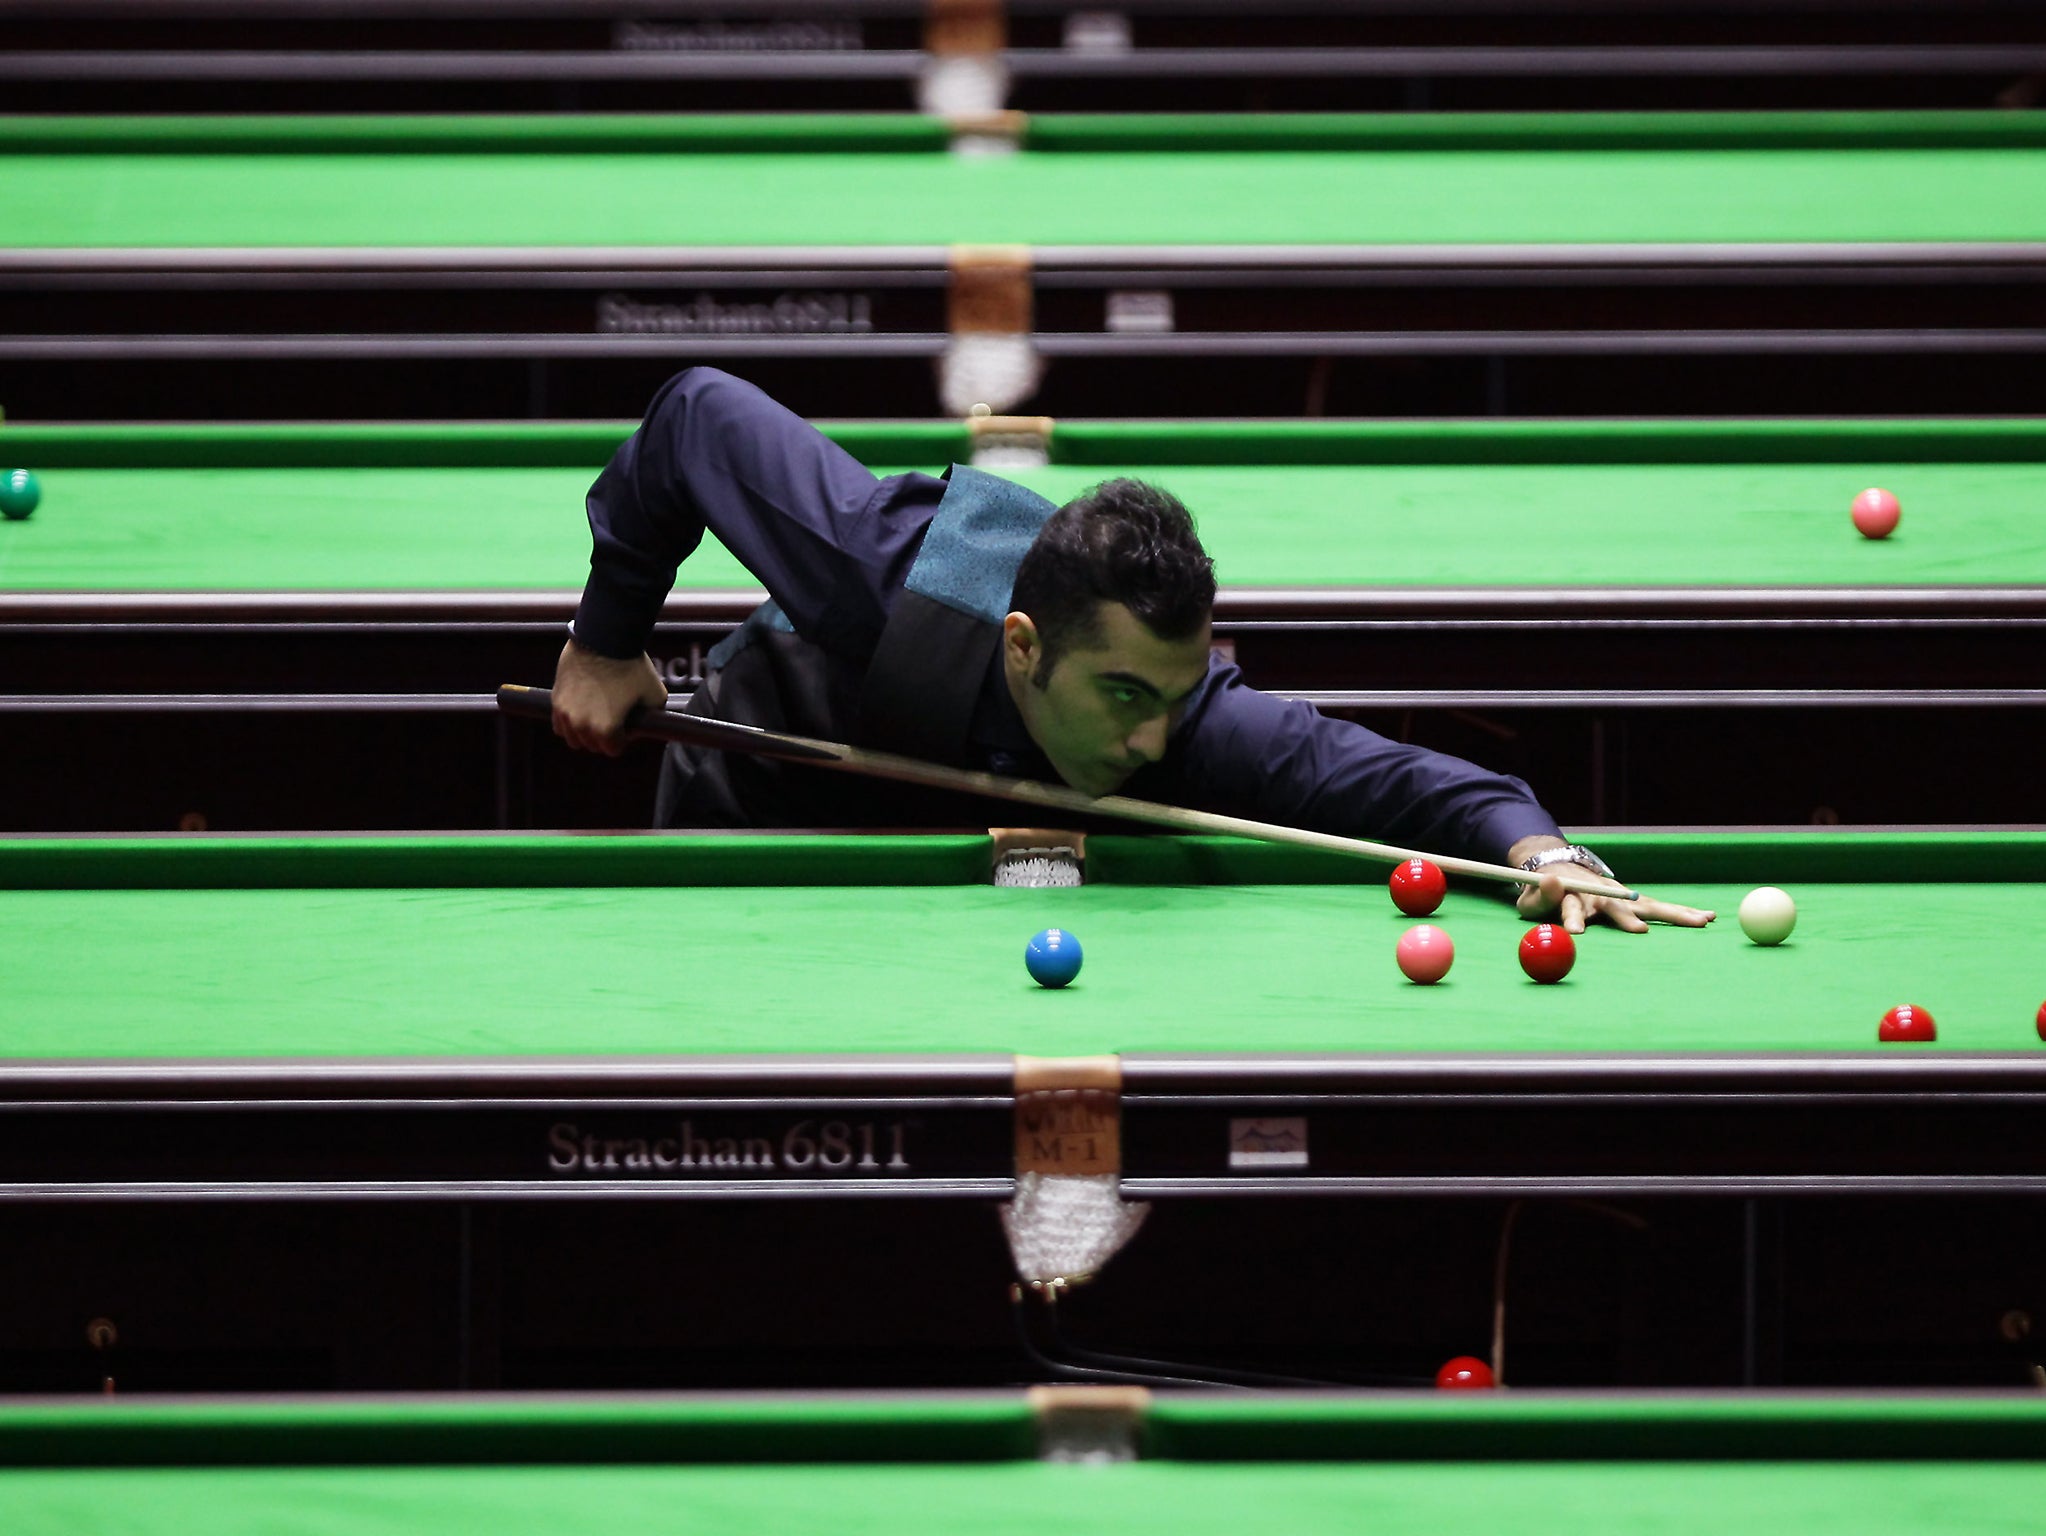 Meet Hossein Vafaei The Miracle Kid who became the first Iranian professional in the history of snooker The Independent The Independent